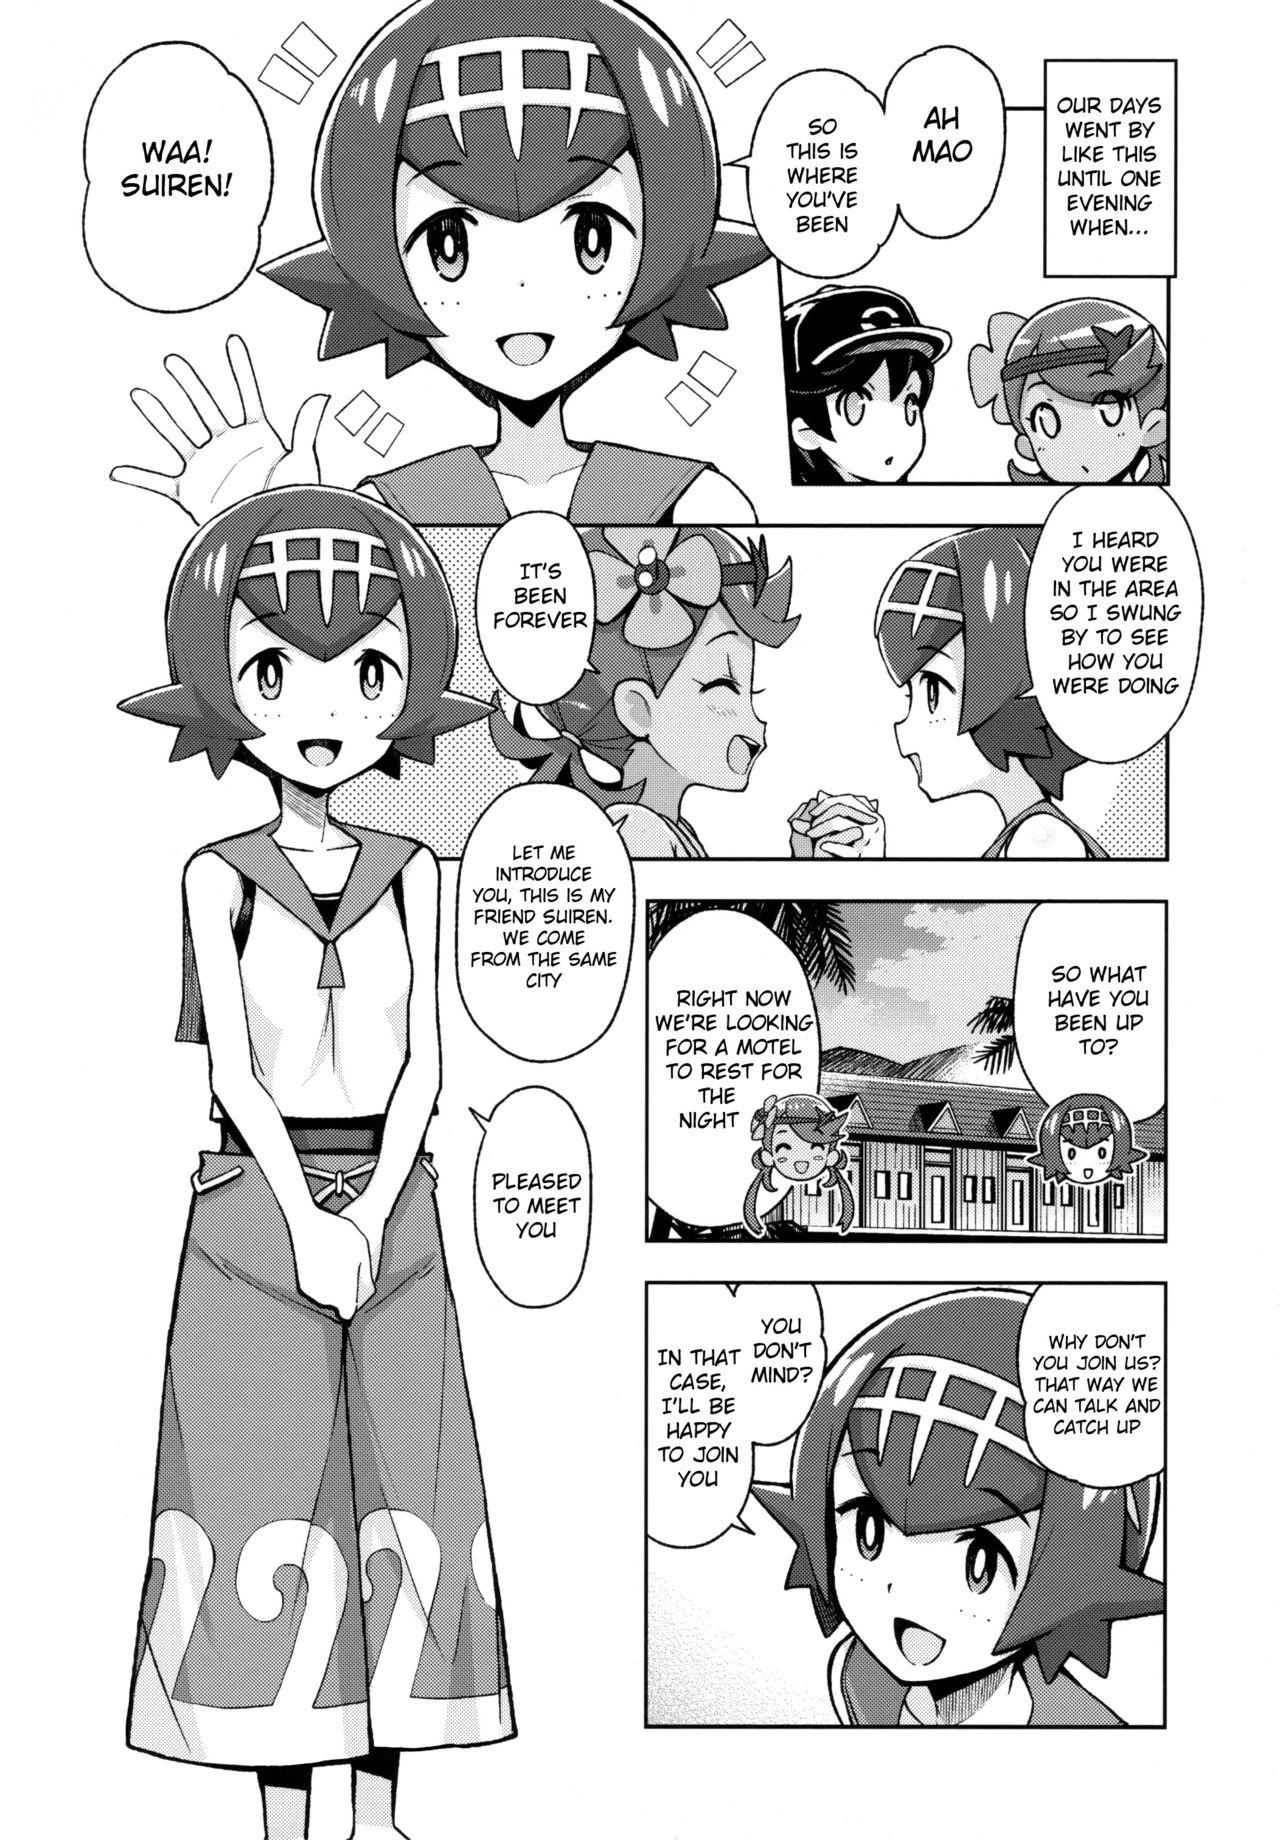 Young Men MAO FRIENDS2 - Pokemon | pocket monsters Punk - Page 3